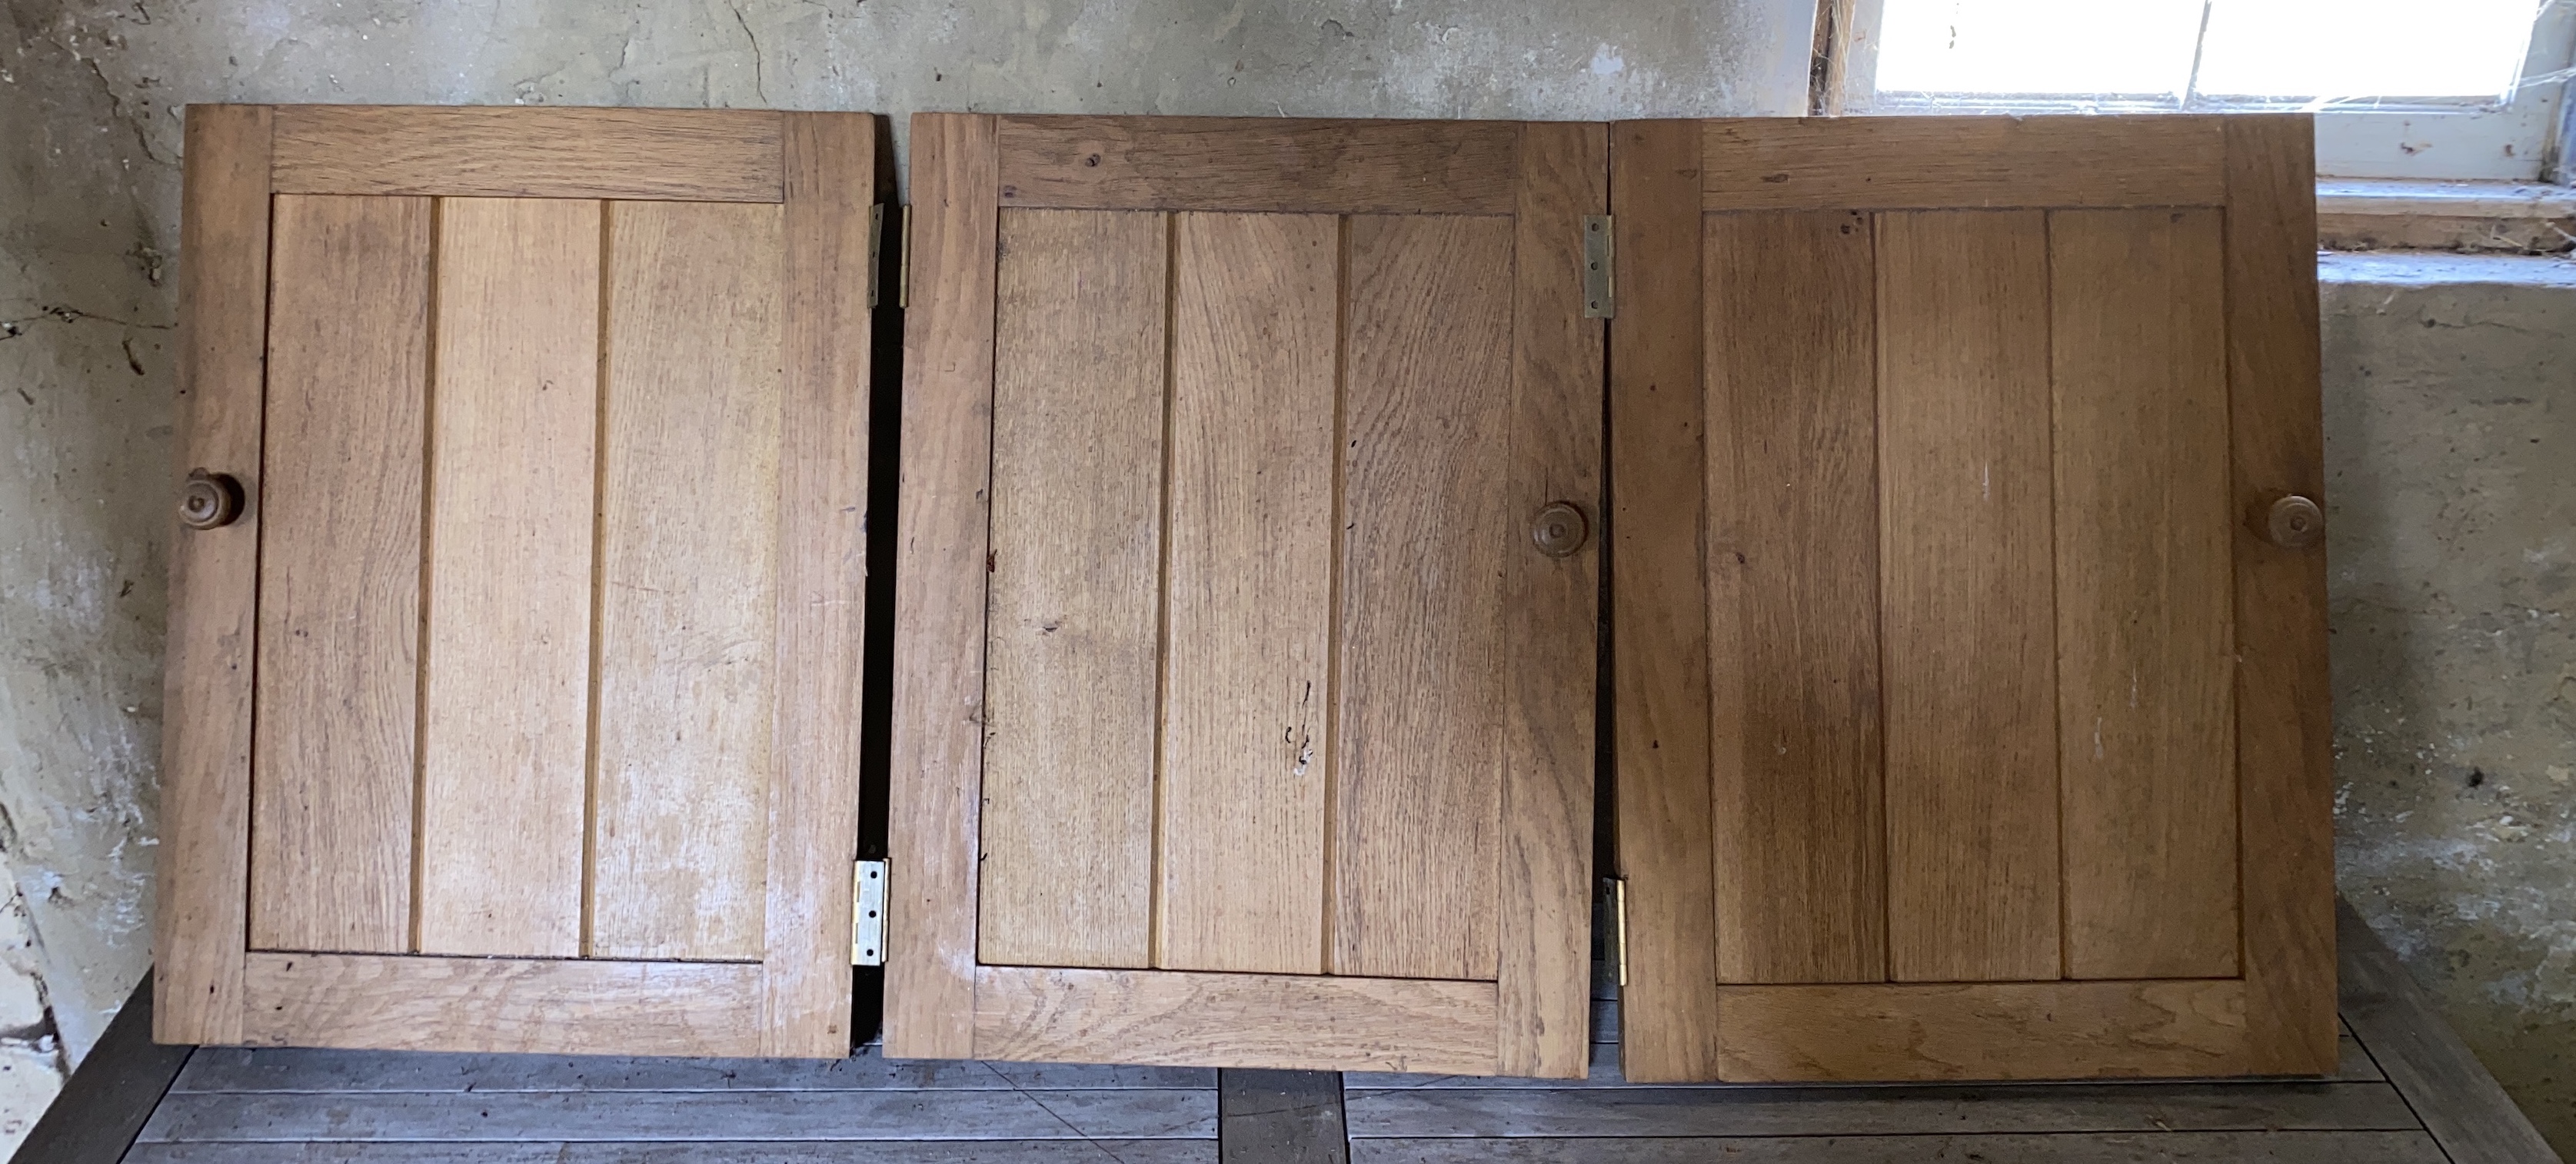 Six solid oak cupboard doors, consisting of three 72 x 52cm; one 73 x 63cm; one 82 x 63.5cm and another, with a canted side, 125 x 62.5cm